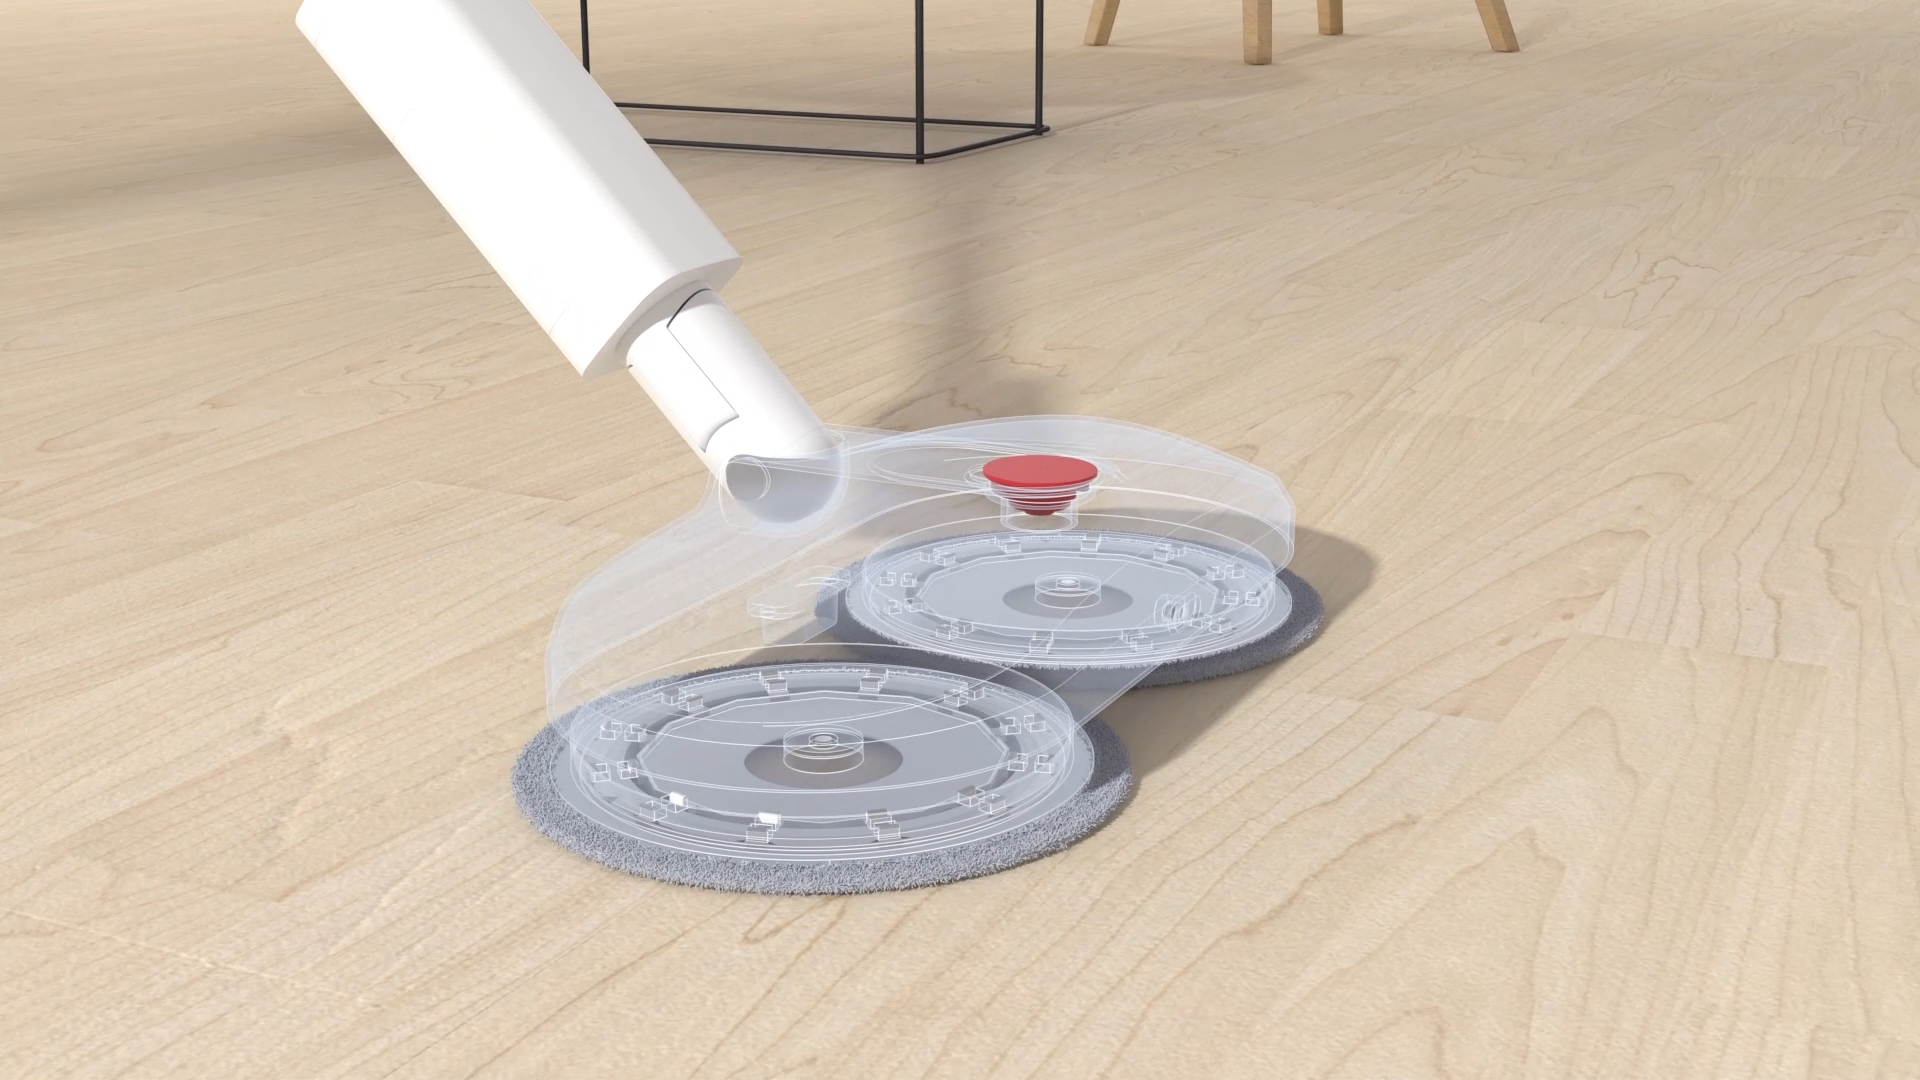 Duspin5 pro Cordless Spin Mop Cleaner Product Film